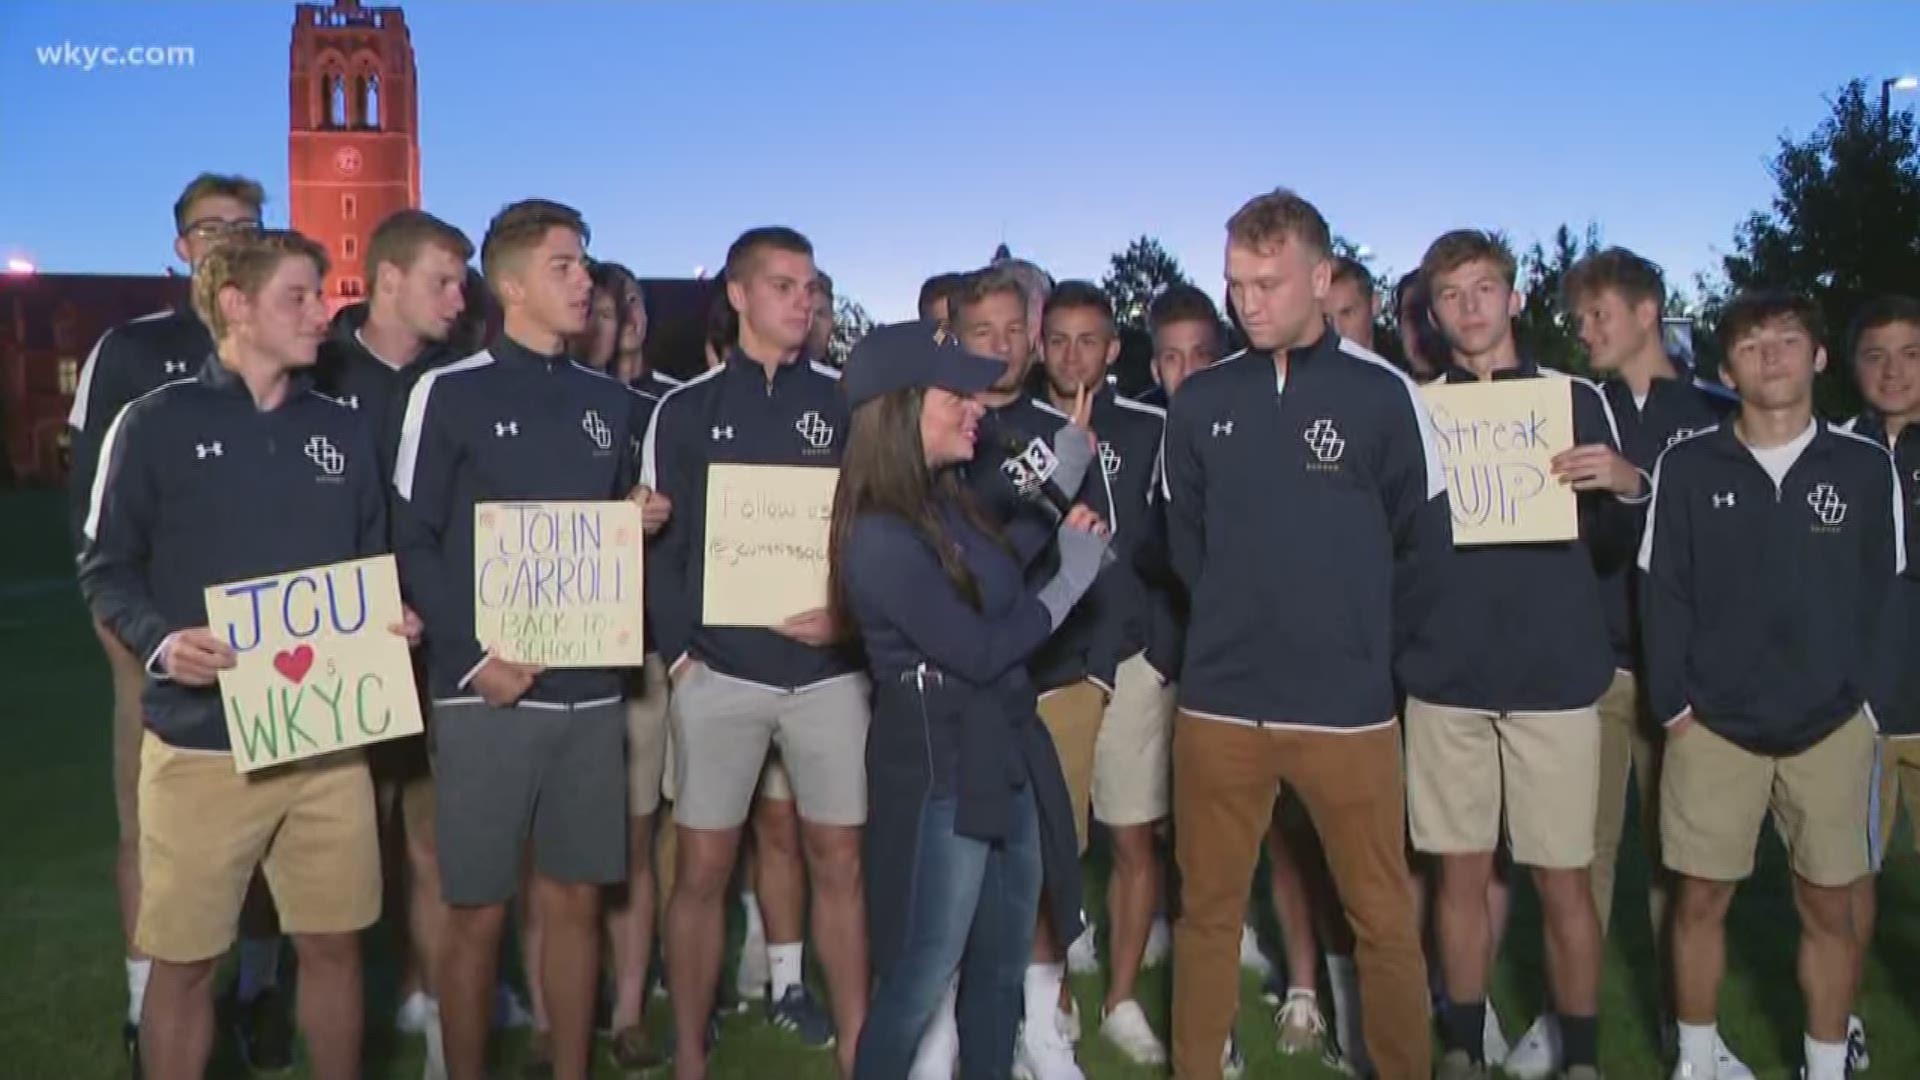 Aug. 23, 2019: As Hollie Strano returned to her Alma Mater at John Carroll University for our back-to-school special, she talked with members of the men's soccer team.